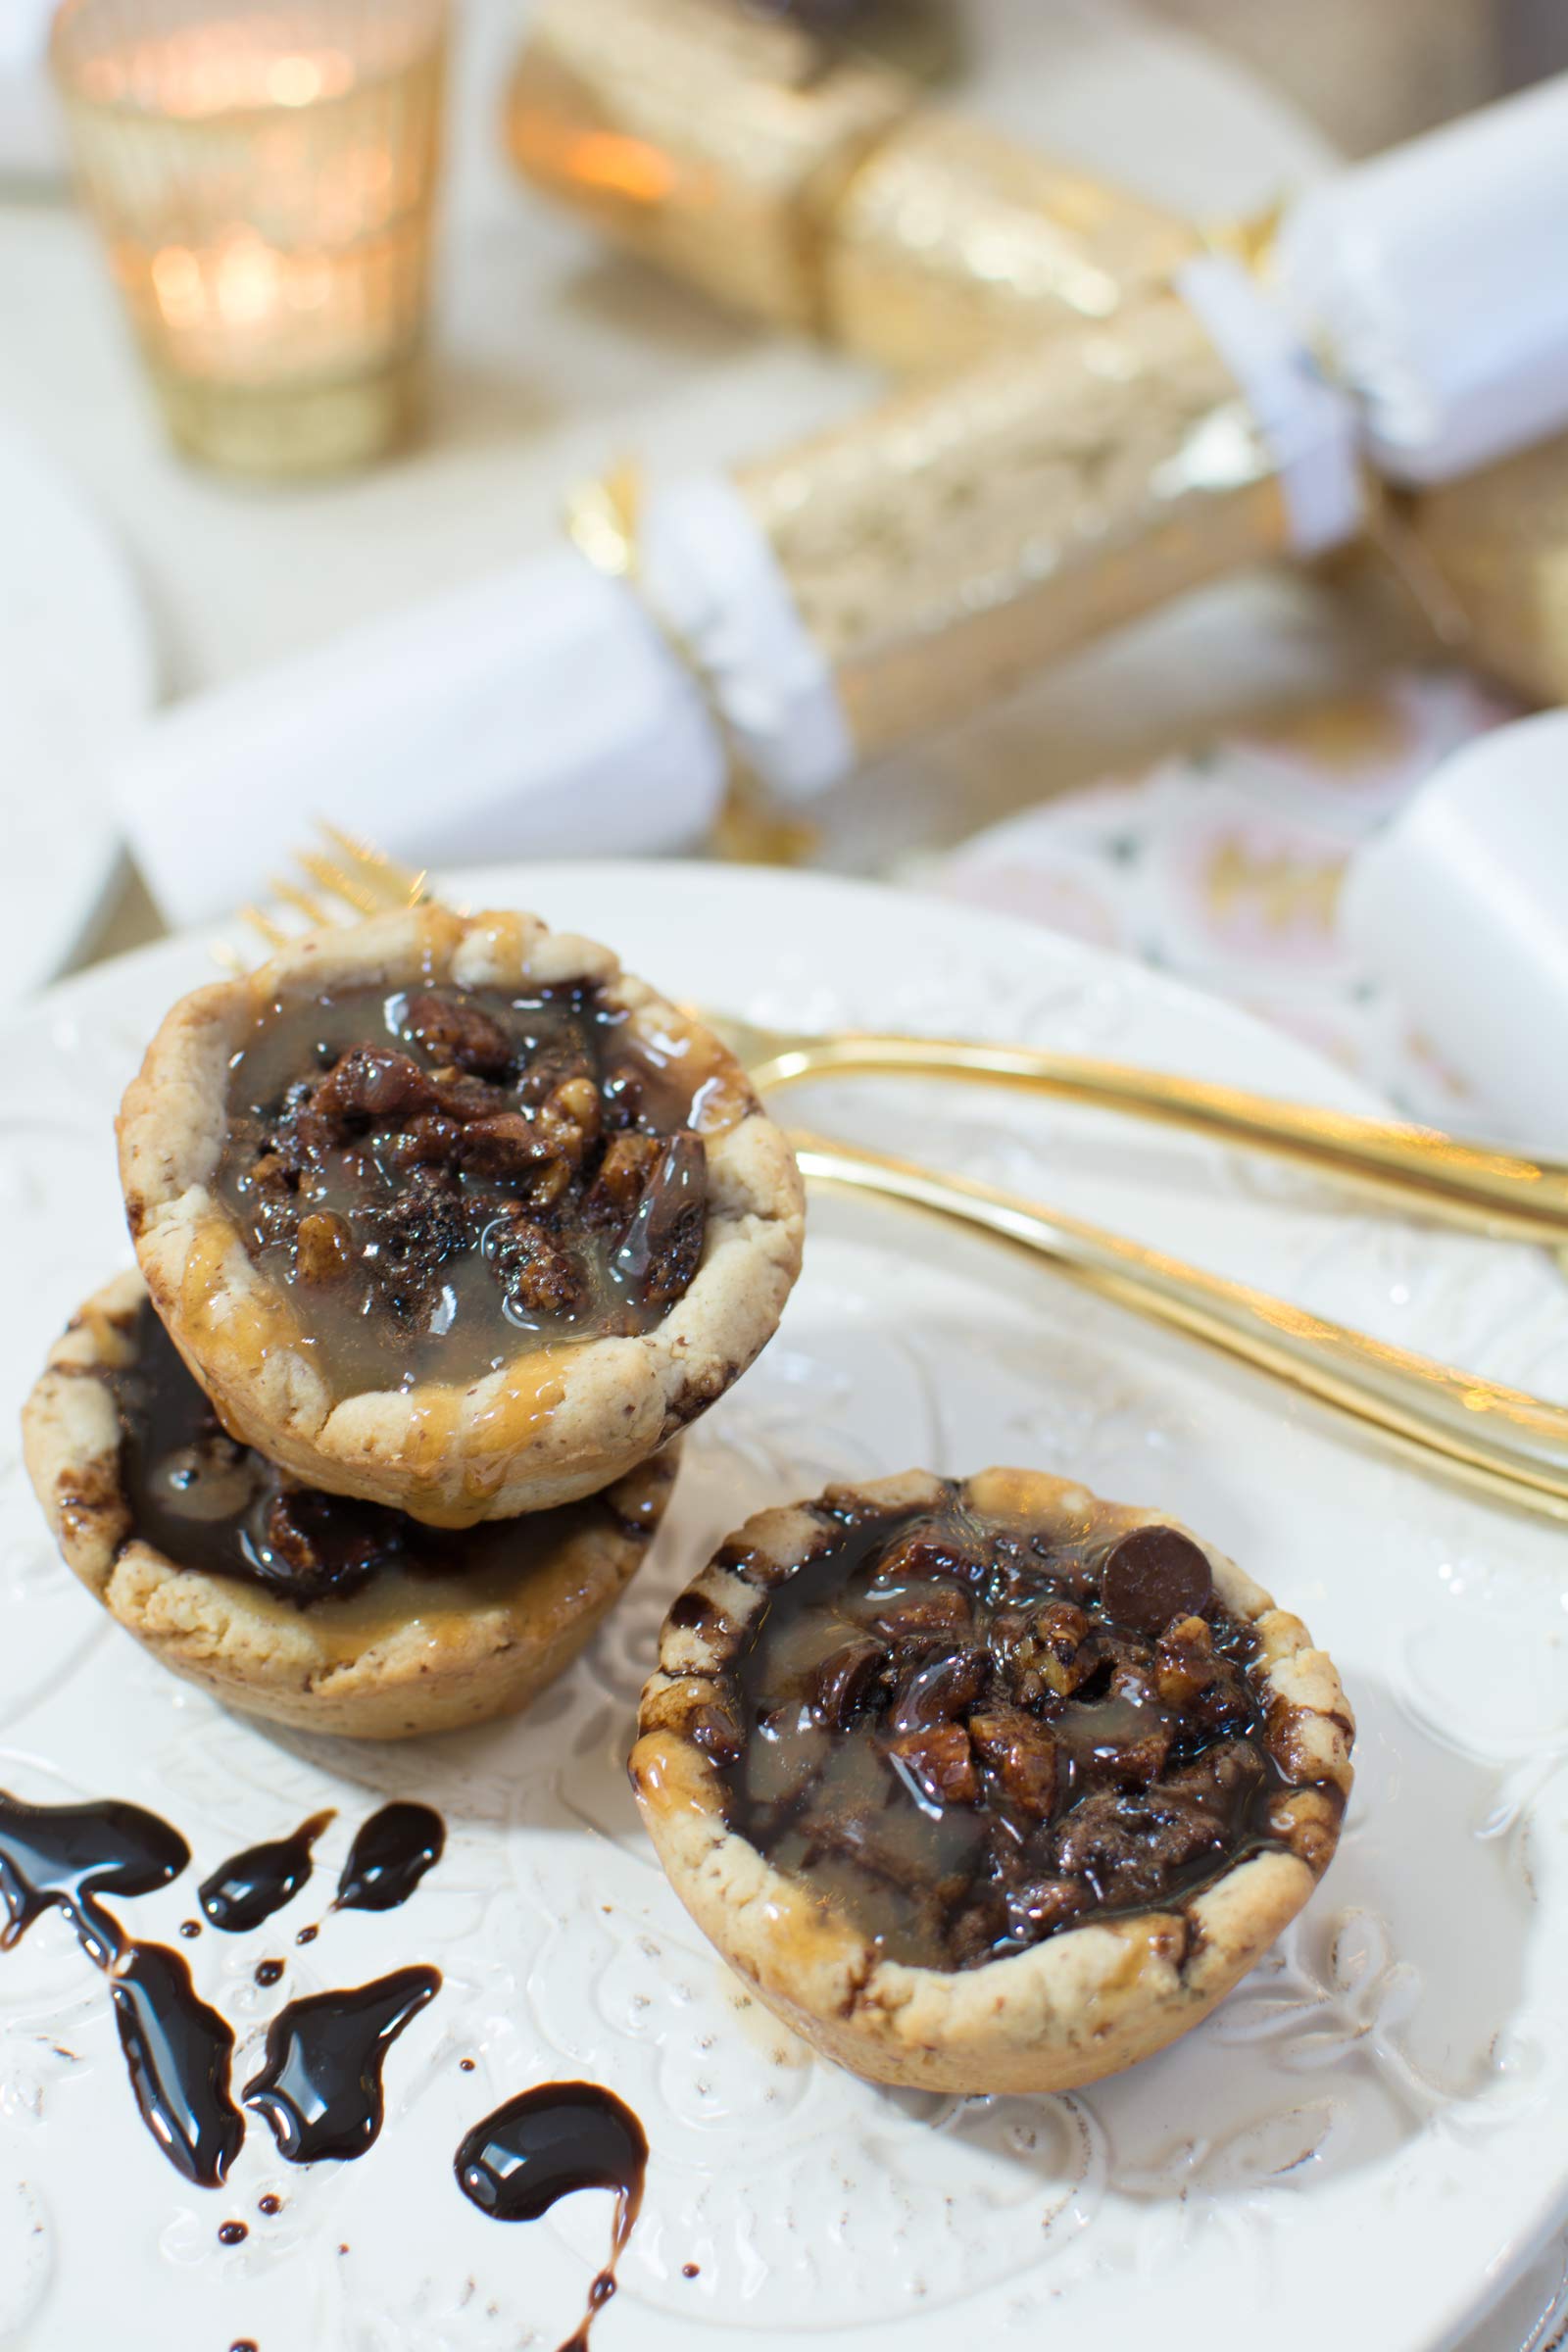 Enjoy #WorldMarketBaking with these Turtledove Pecan Tassies PLUS enter the Great Holiday Baking Sweepstakes! Learn all about it @LittleFiggyFood #ad